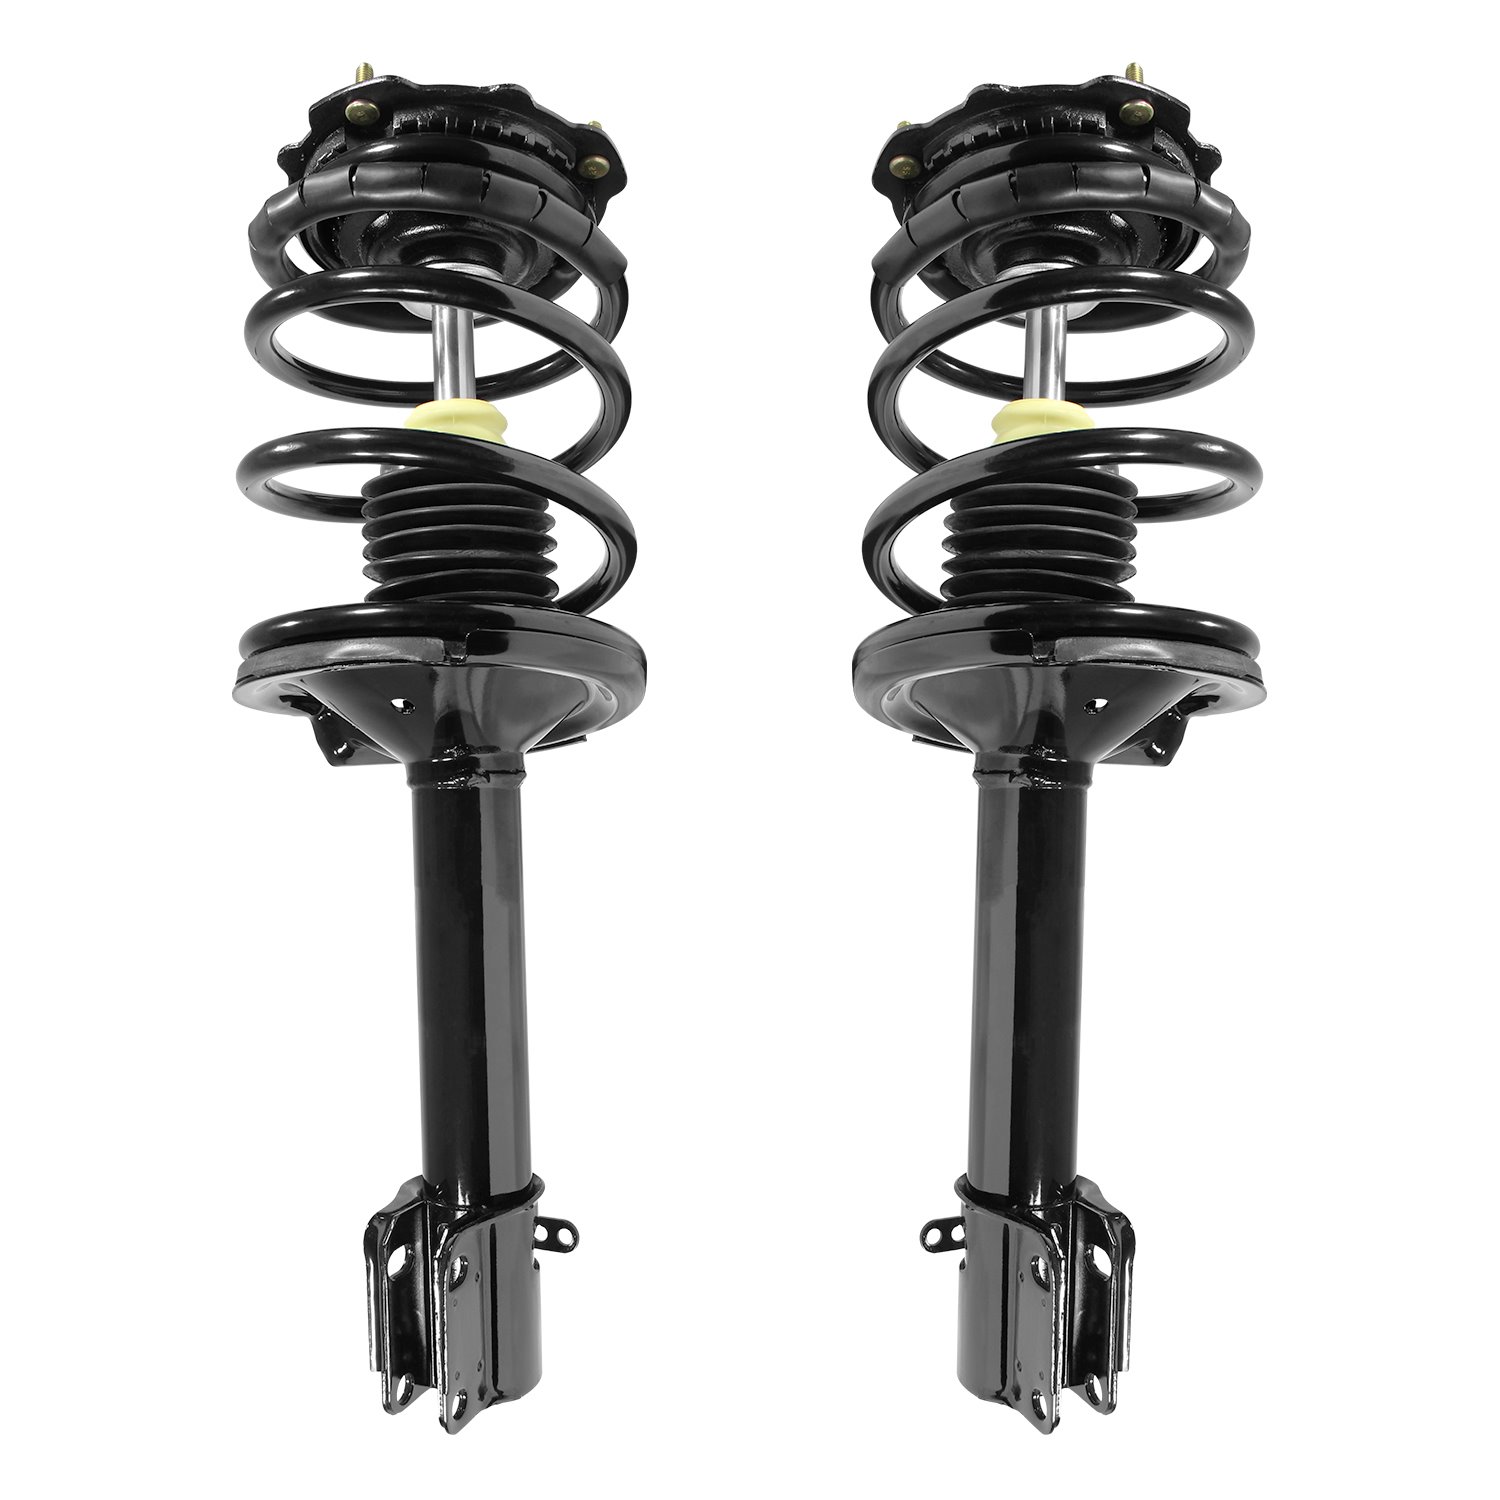 2-15120-001 Suspension Strut & Coil Spring Assembly Set Fits Select Dodge Neon, Plymouth Neon